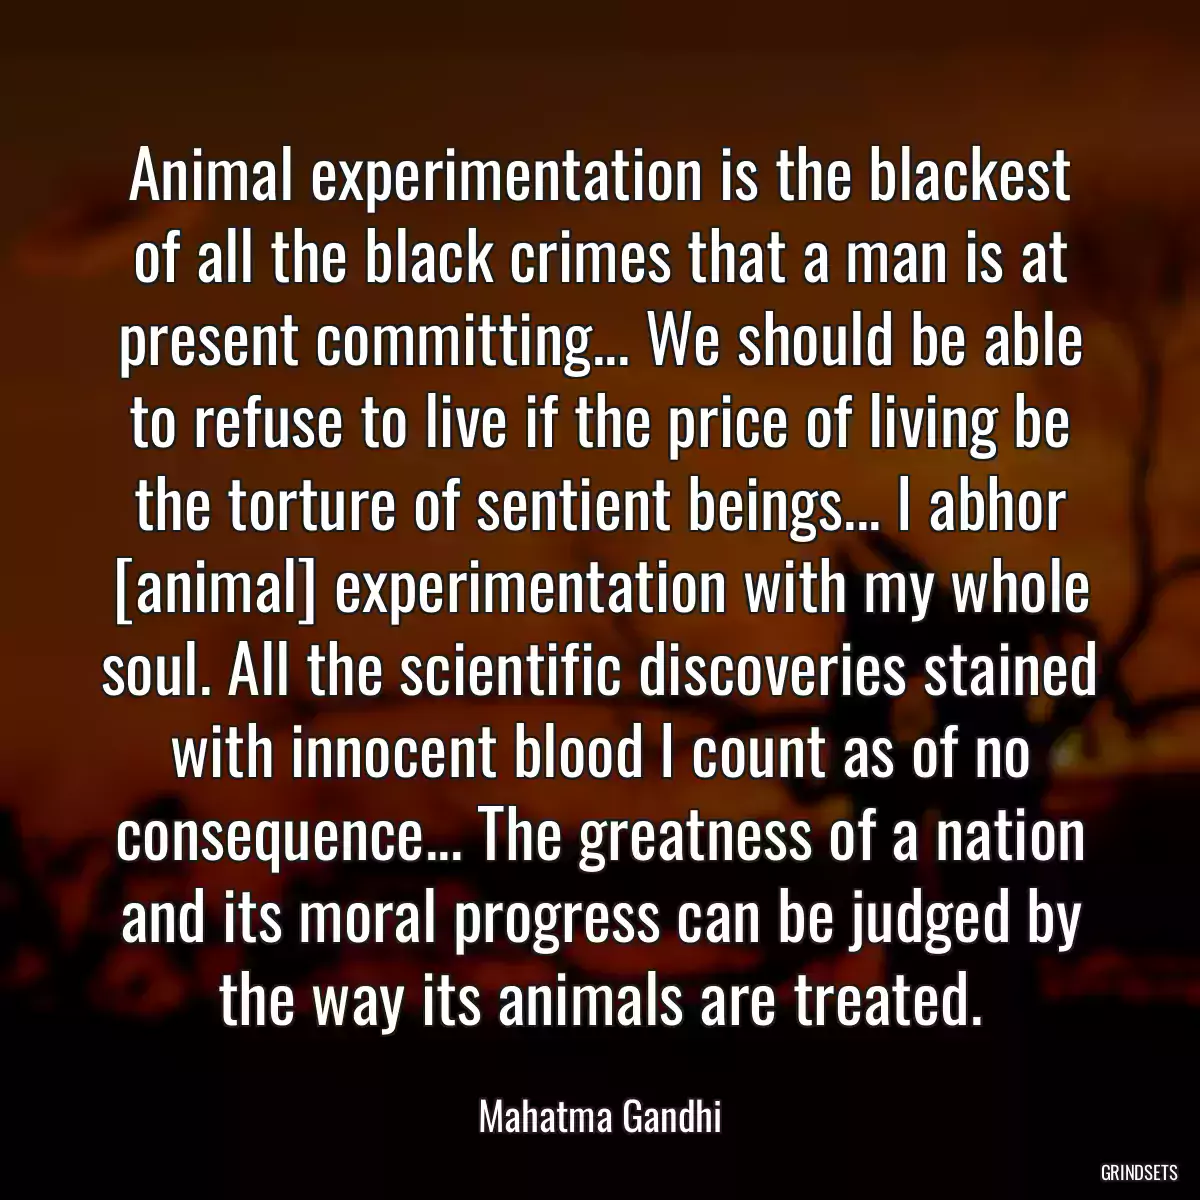 Animal experimentation is the blackest of all the black crimes that a man is at present committing... We should be able to refuse to live if the price of living be the torture of sentient beings... I abhor [animal] experimentation with my whole soul. All the scientific discoveries stained with innocent blood I count as of no consequence... The greatness of a nation and its moral progress can be judged by the way its animals are treated.